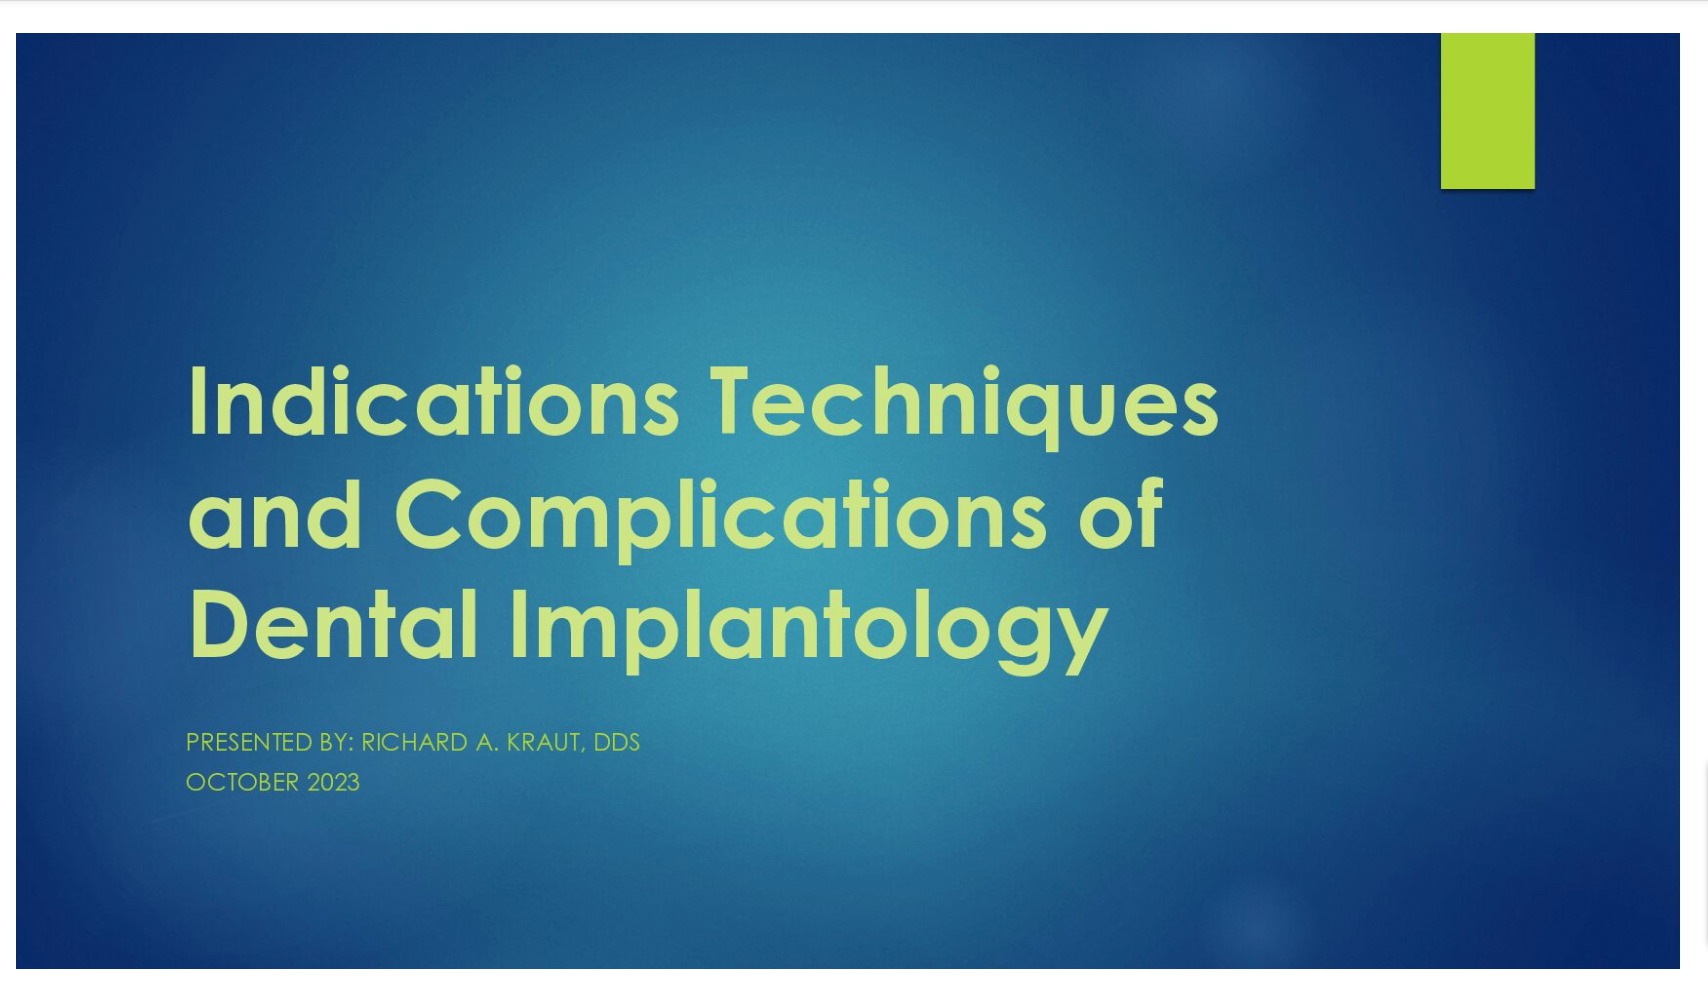 Indications, Techniques and Complications of Dental Implantology